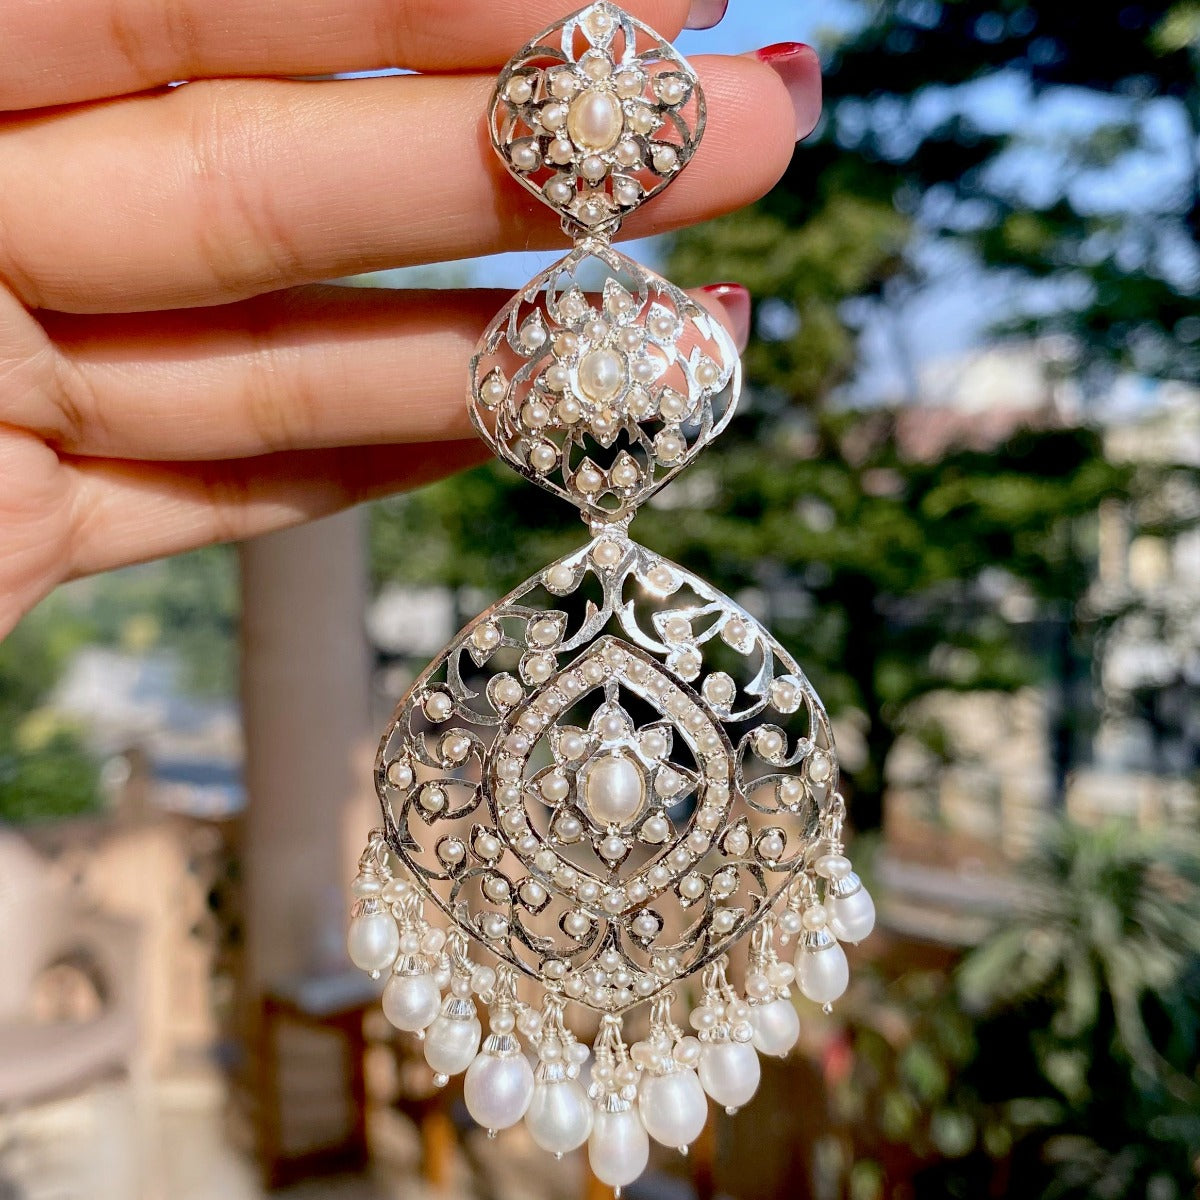 Statement Edwardian Earrings | Inspired From Edwardian Victorian Era | Indian Touch